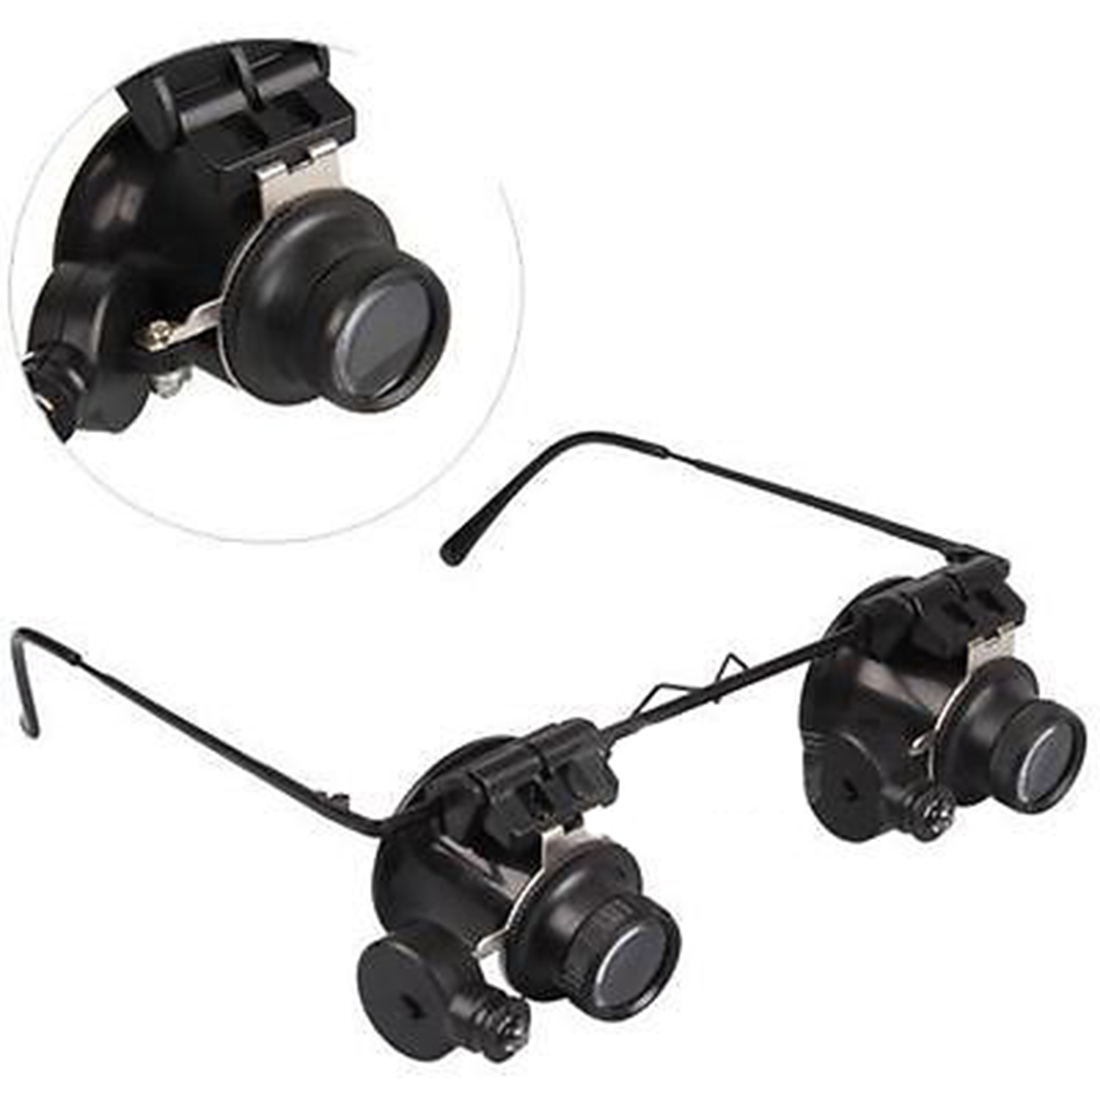 LED 20X Magnifier Magnifying Dual Eye Glasses Loupe Lens Jeweler Watch Repair Loupe Magnification Jewellers Loupe